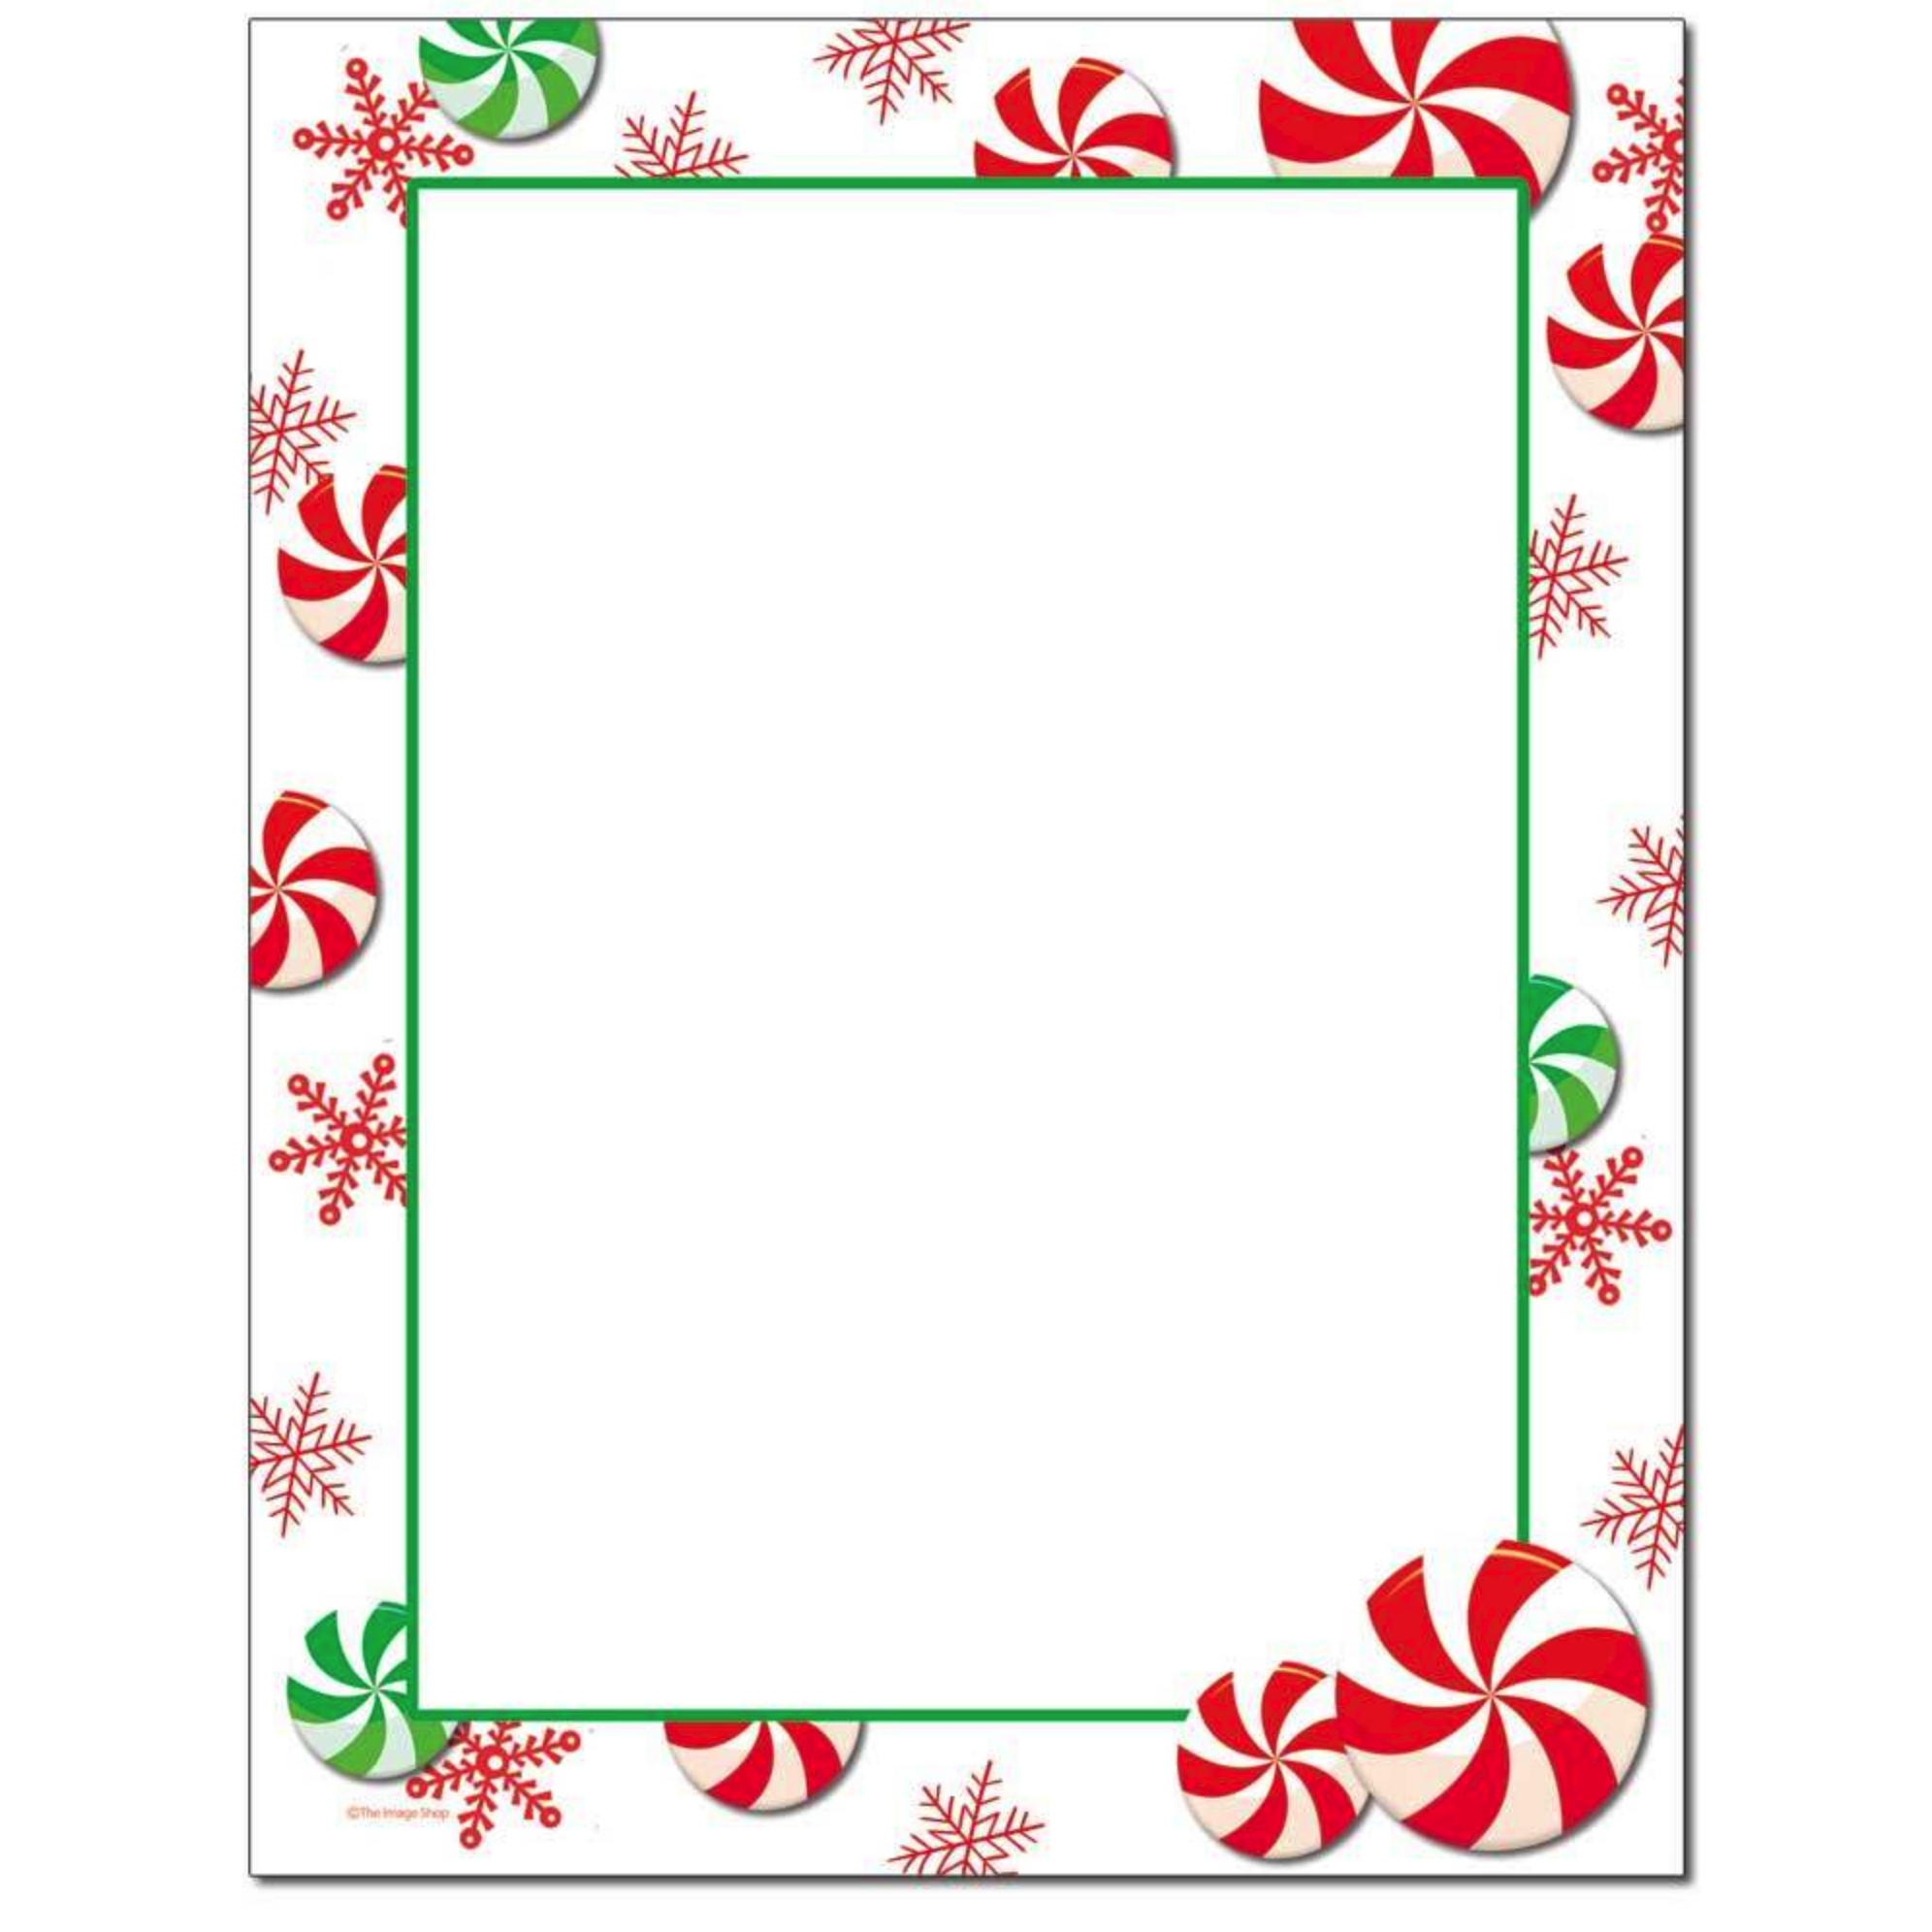 Peppermint Candy White Border Christmas Holiday Paper